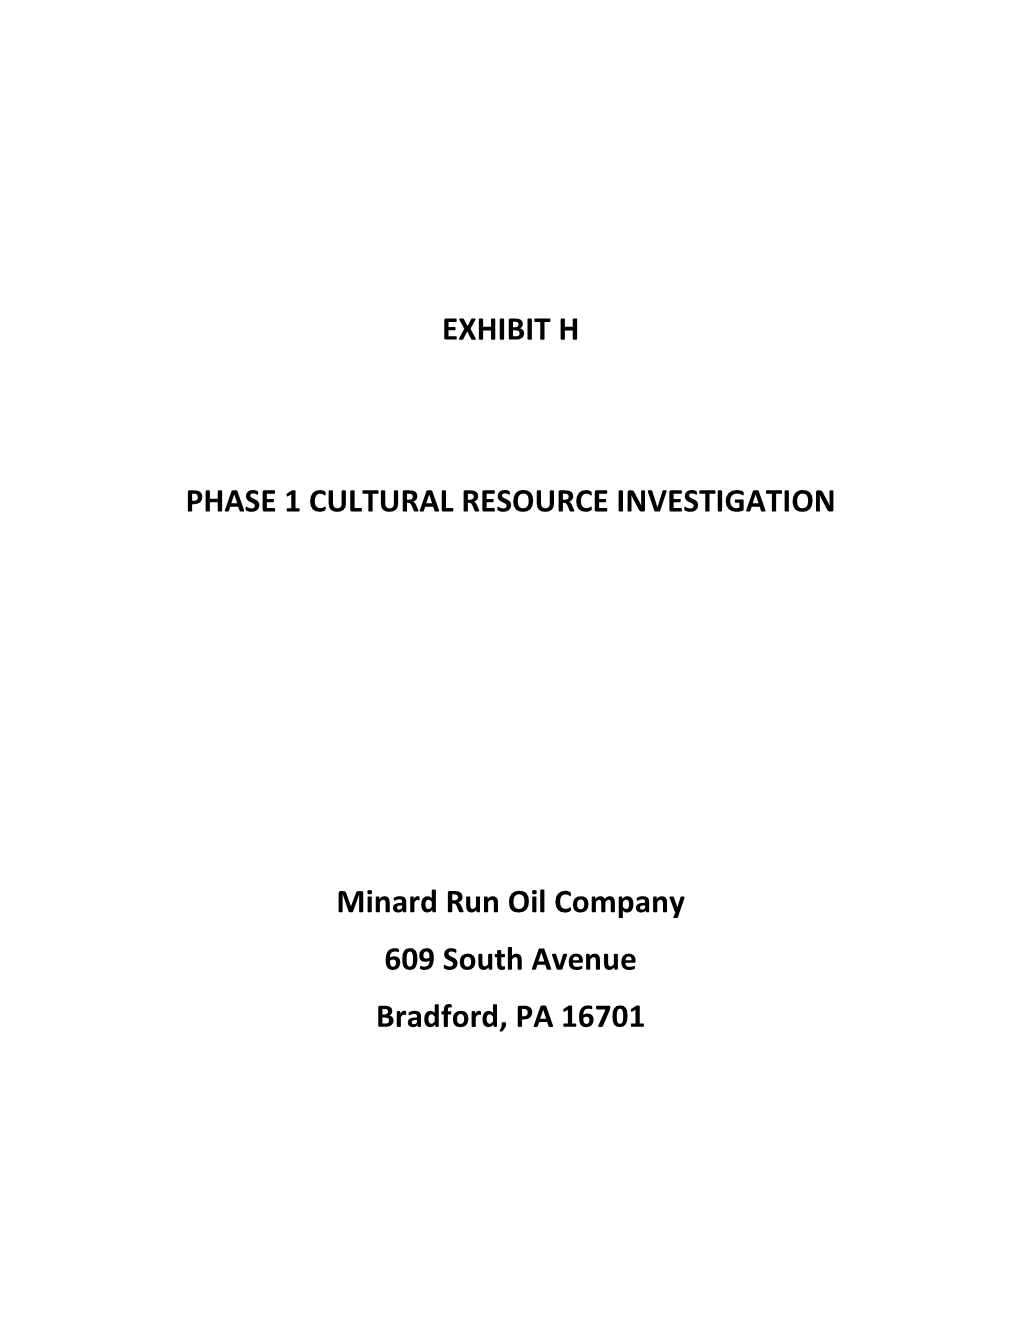 Exhibit H Phase 1 Cultural Resource Investigation